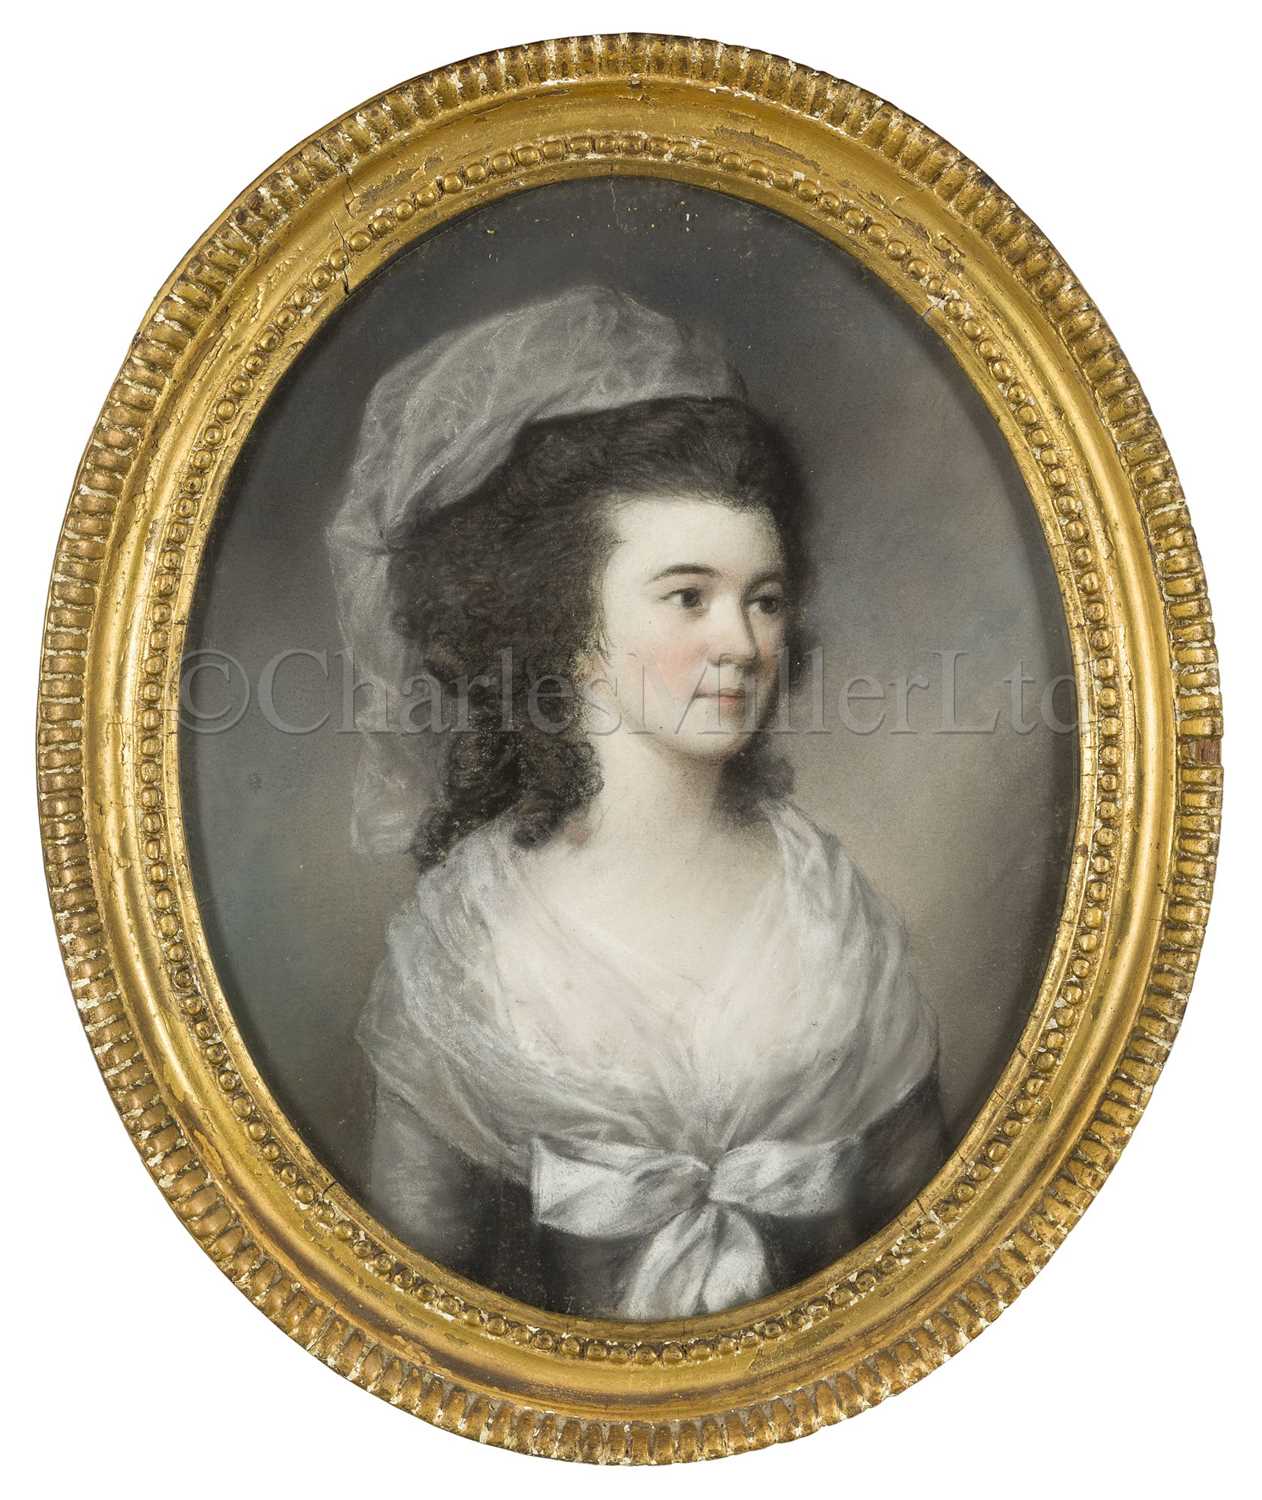 Lot 192 - Ø ATTRIBUTED TO HUGH DOUGLAS HAMILTON (1739-1808): Portrait of a lady identified as Dorothea Rotheram, wife of Captain Rotheram, circa 1790